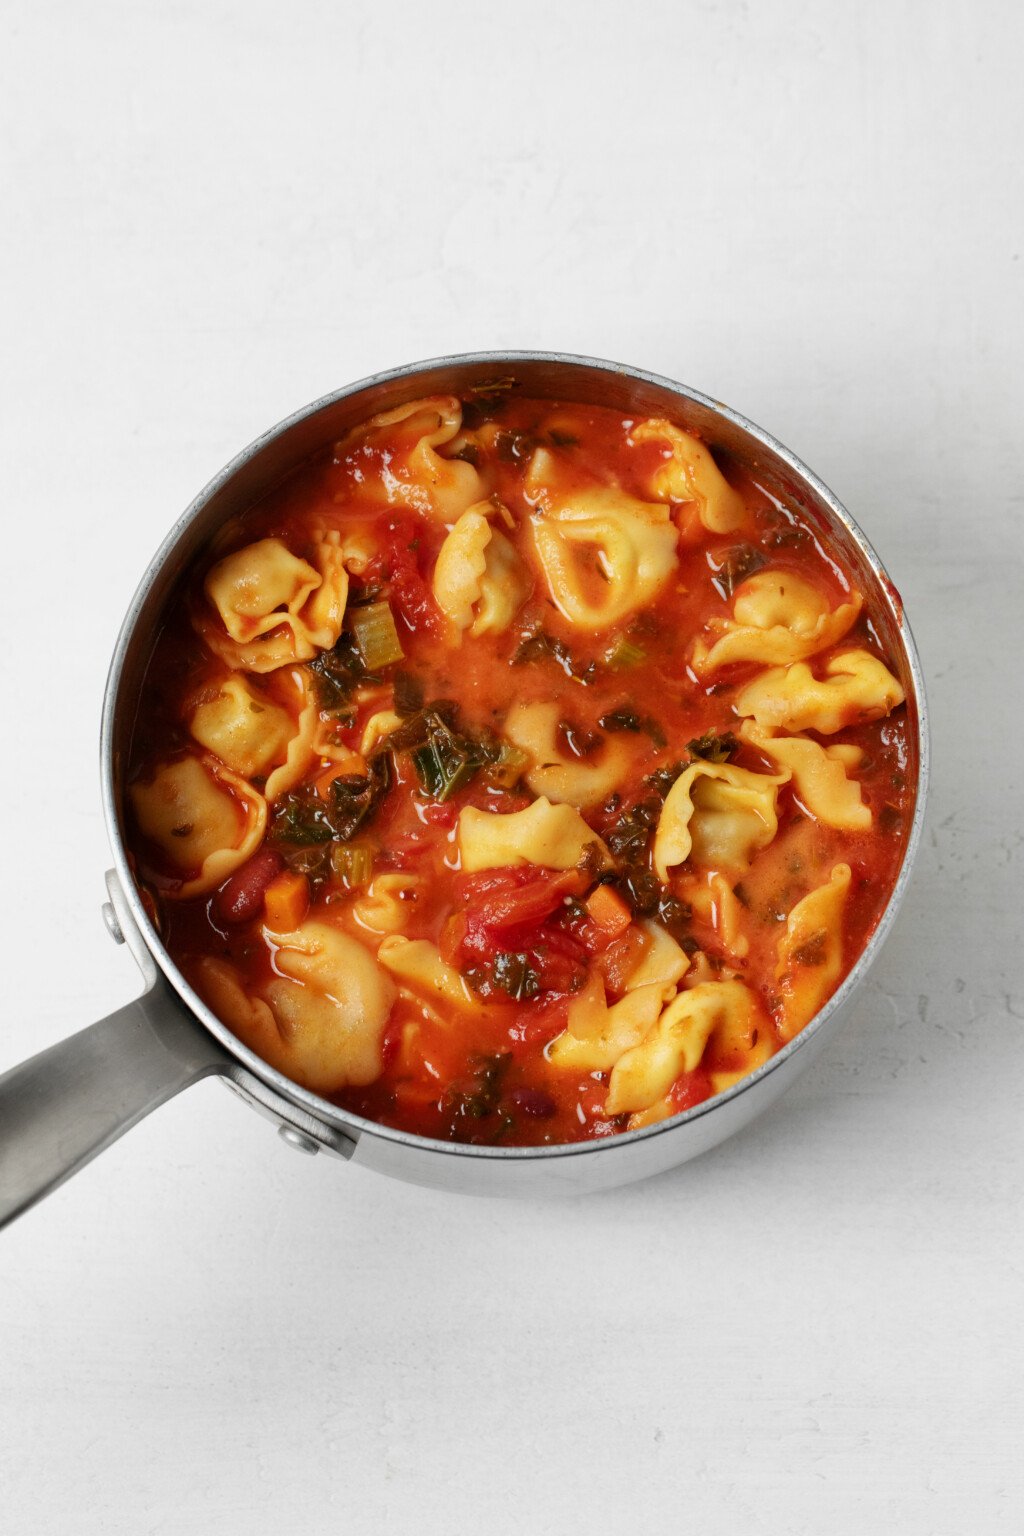 A saucepan holds tomatoes, beans, and vegan stuffed pasta.